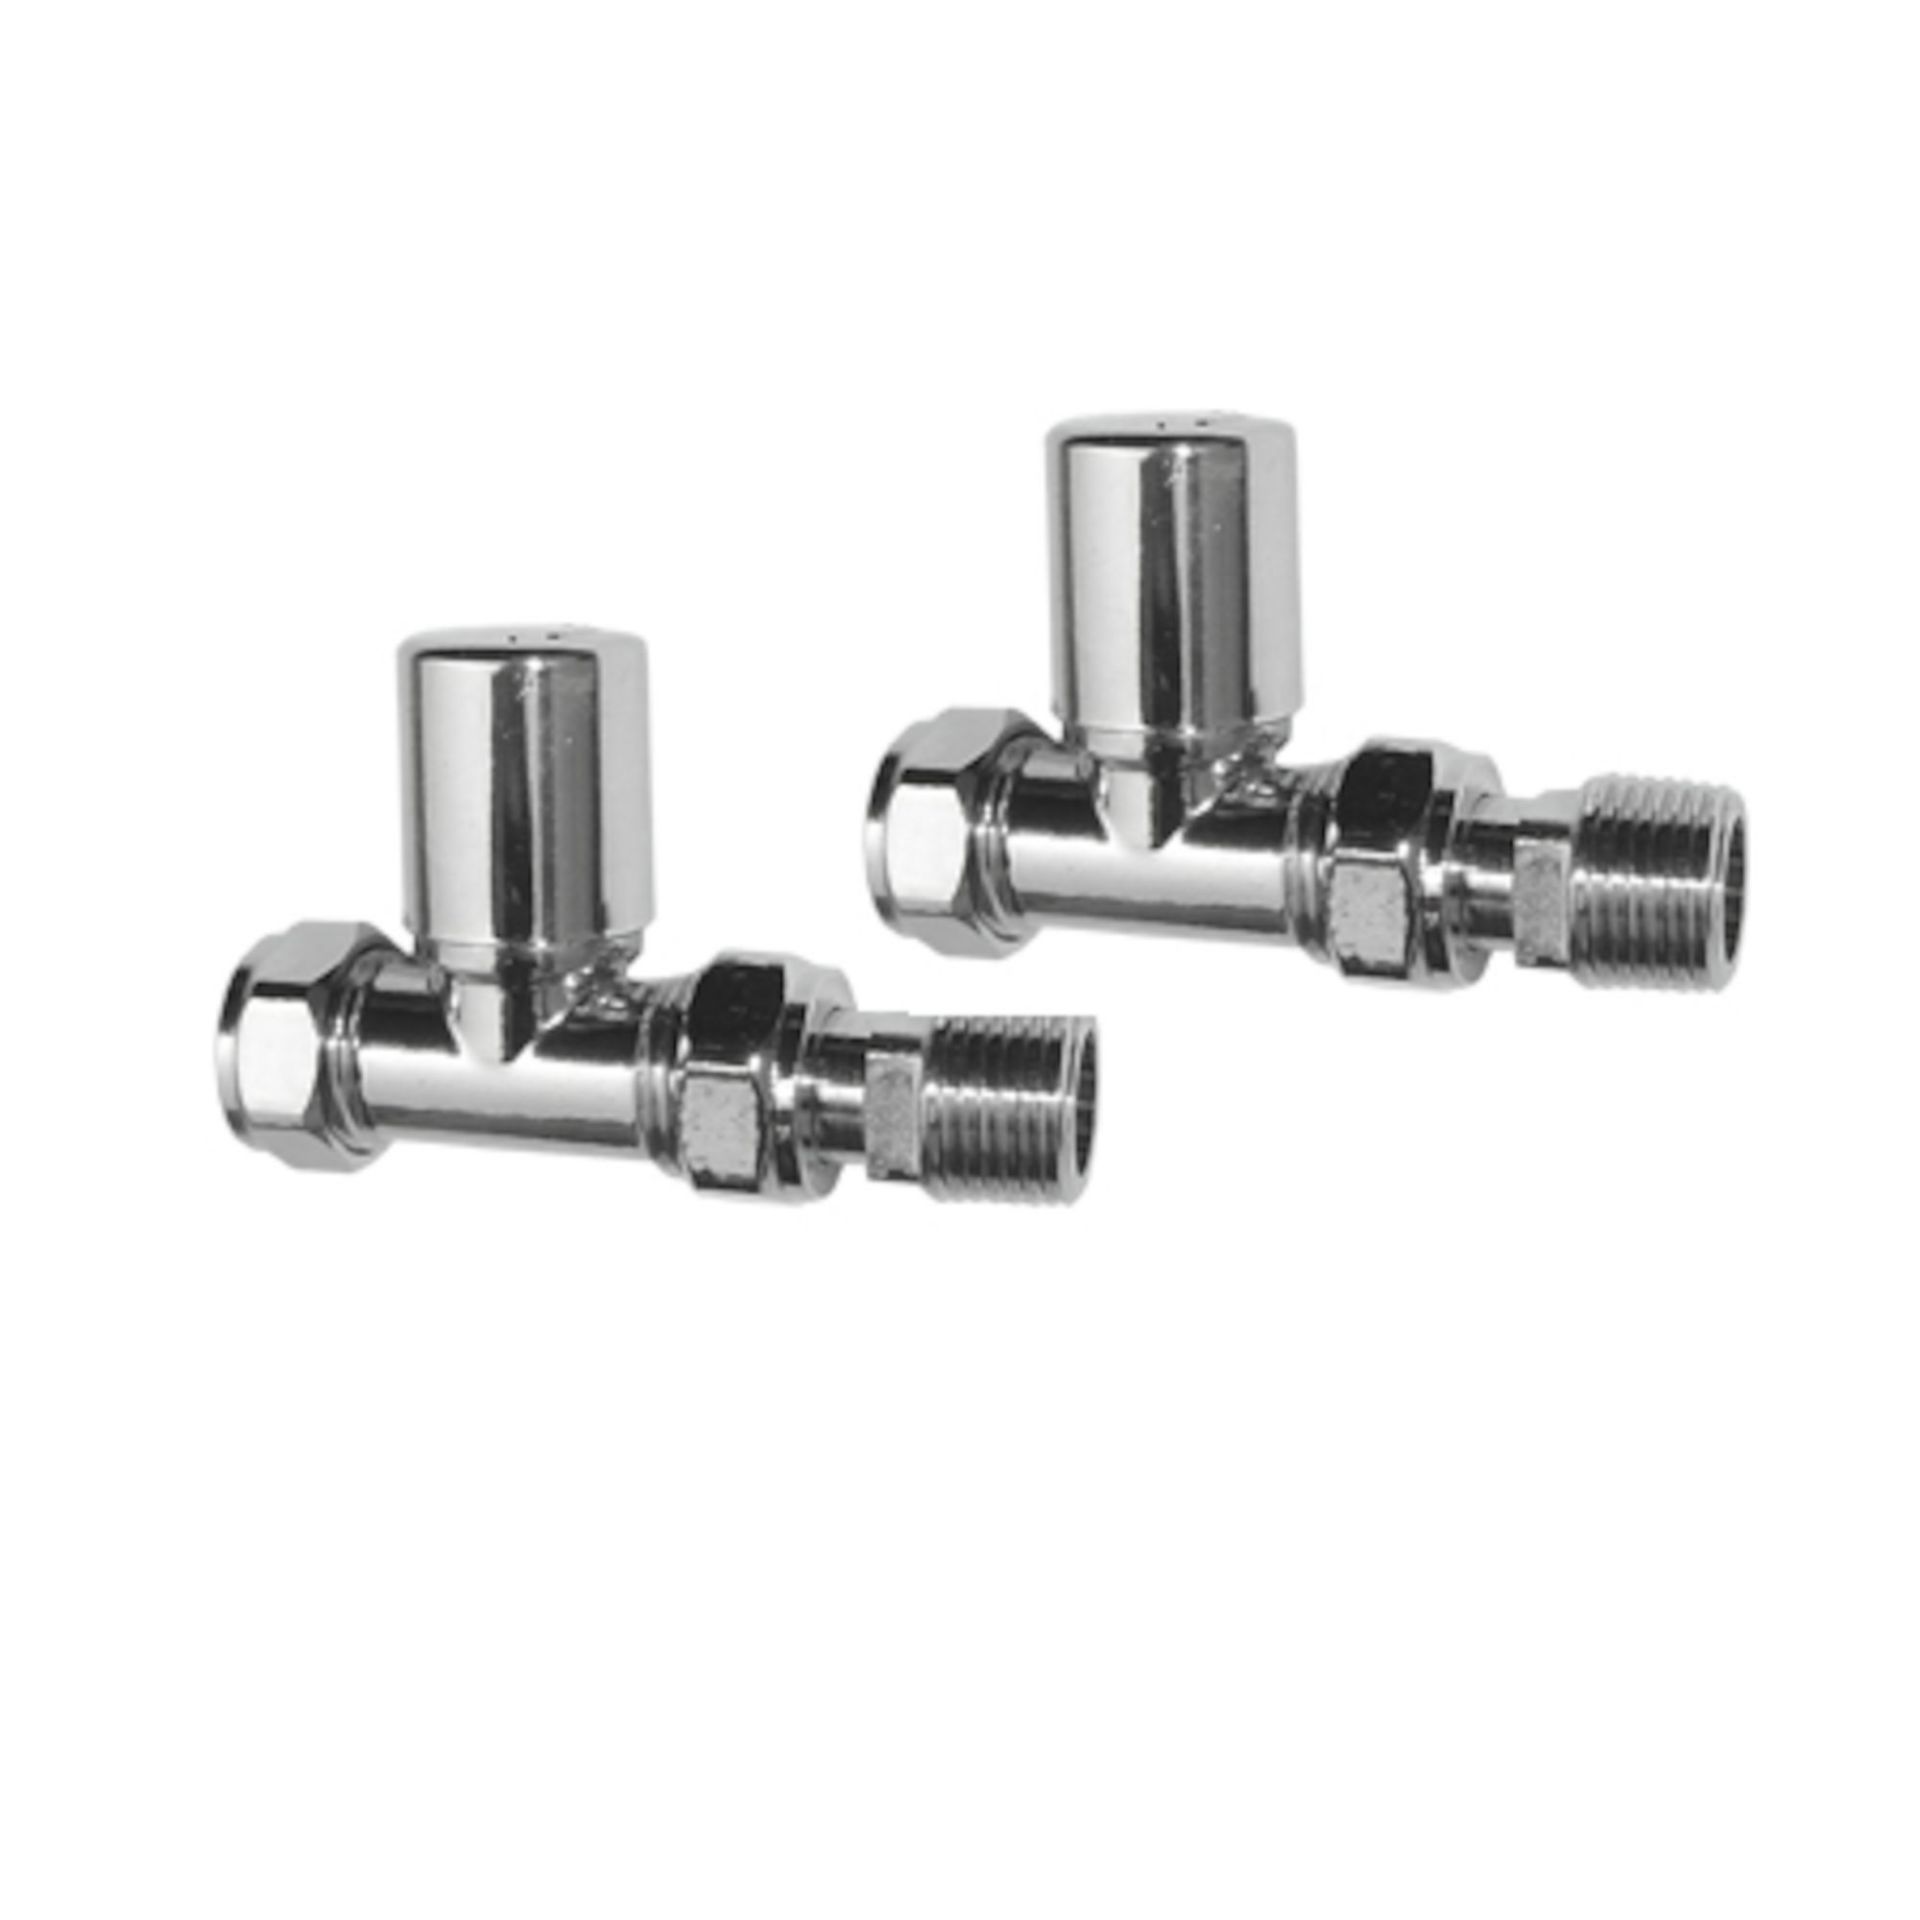 (NF125) Standard 15mm Connection Straight Chrome Radiator Valves Chrome Plated Solid Brass